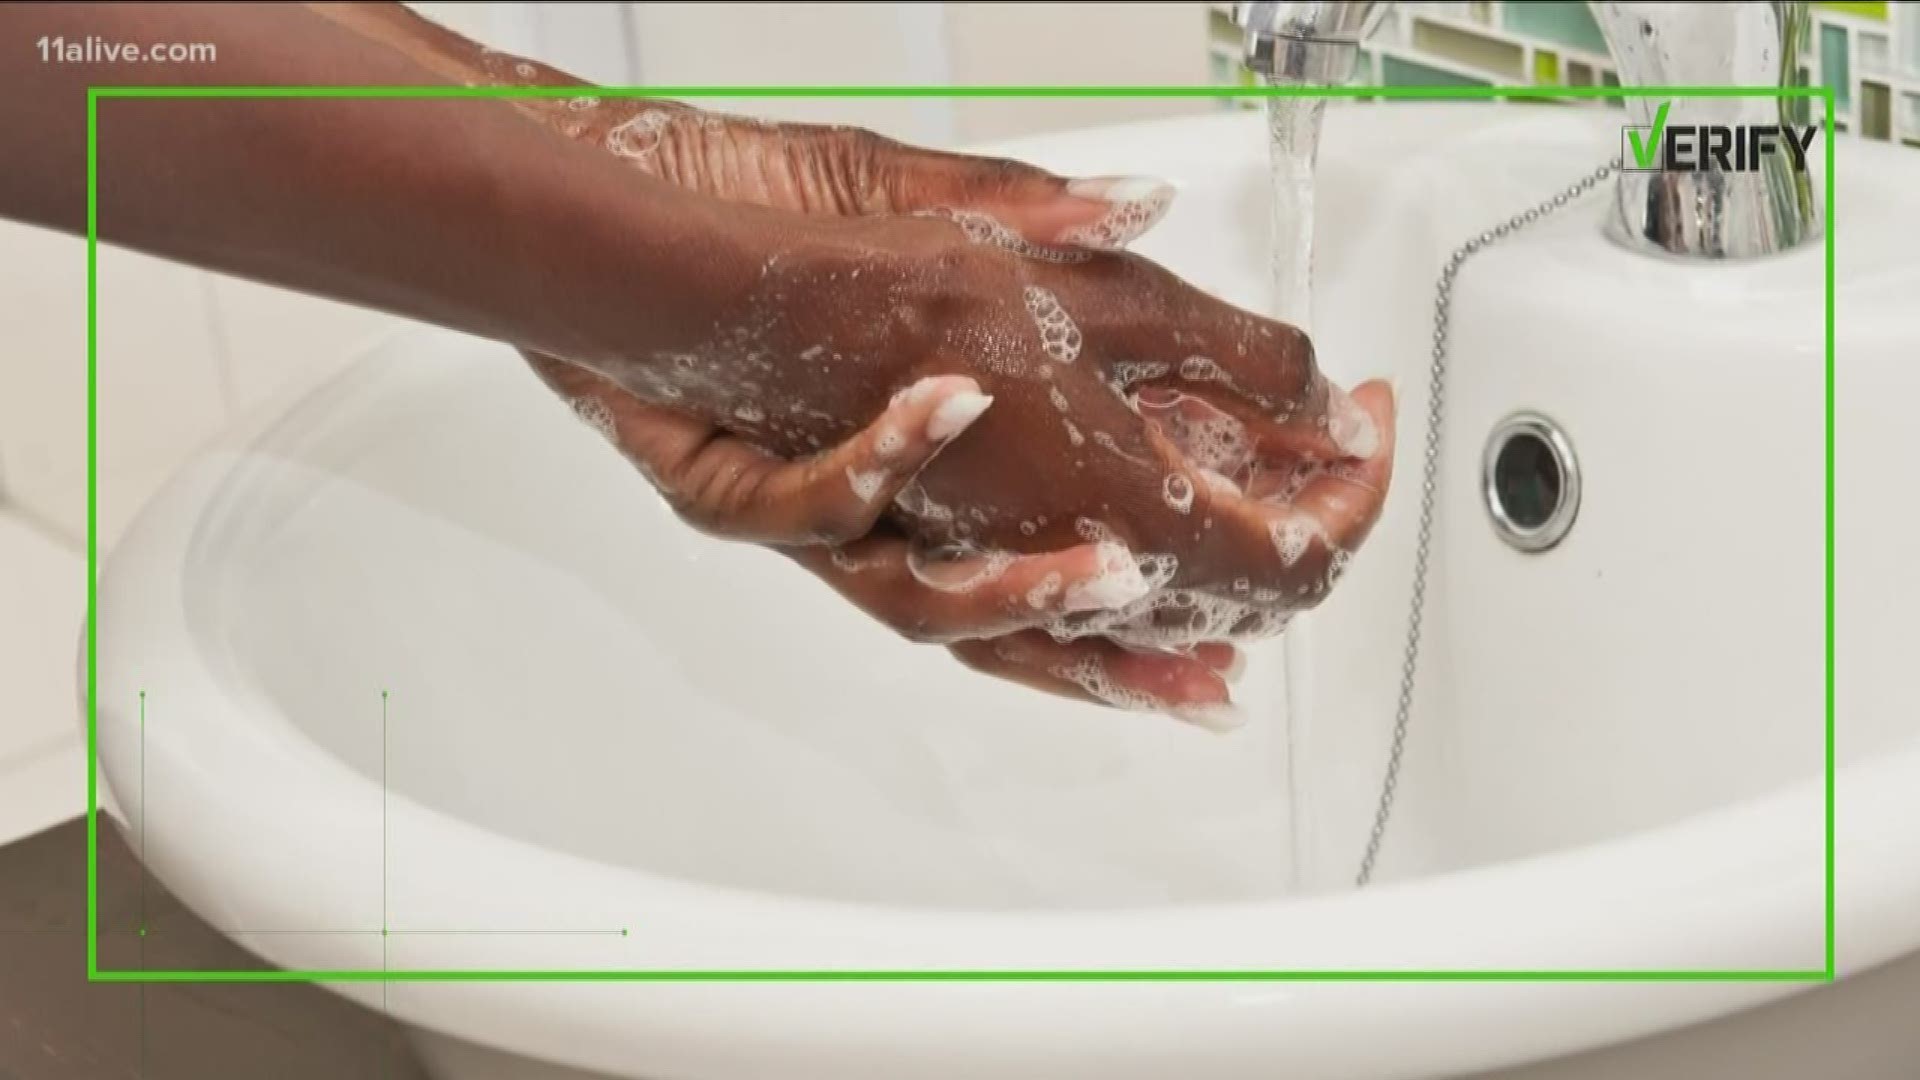 Consumer Health: How's your hand-washing technique? - Mayo Clinic